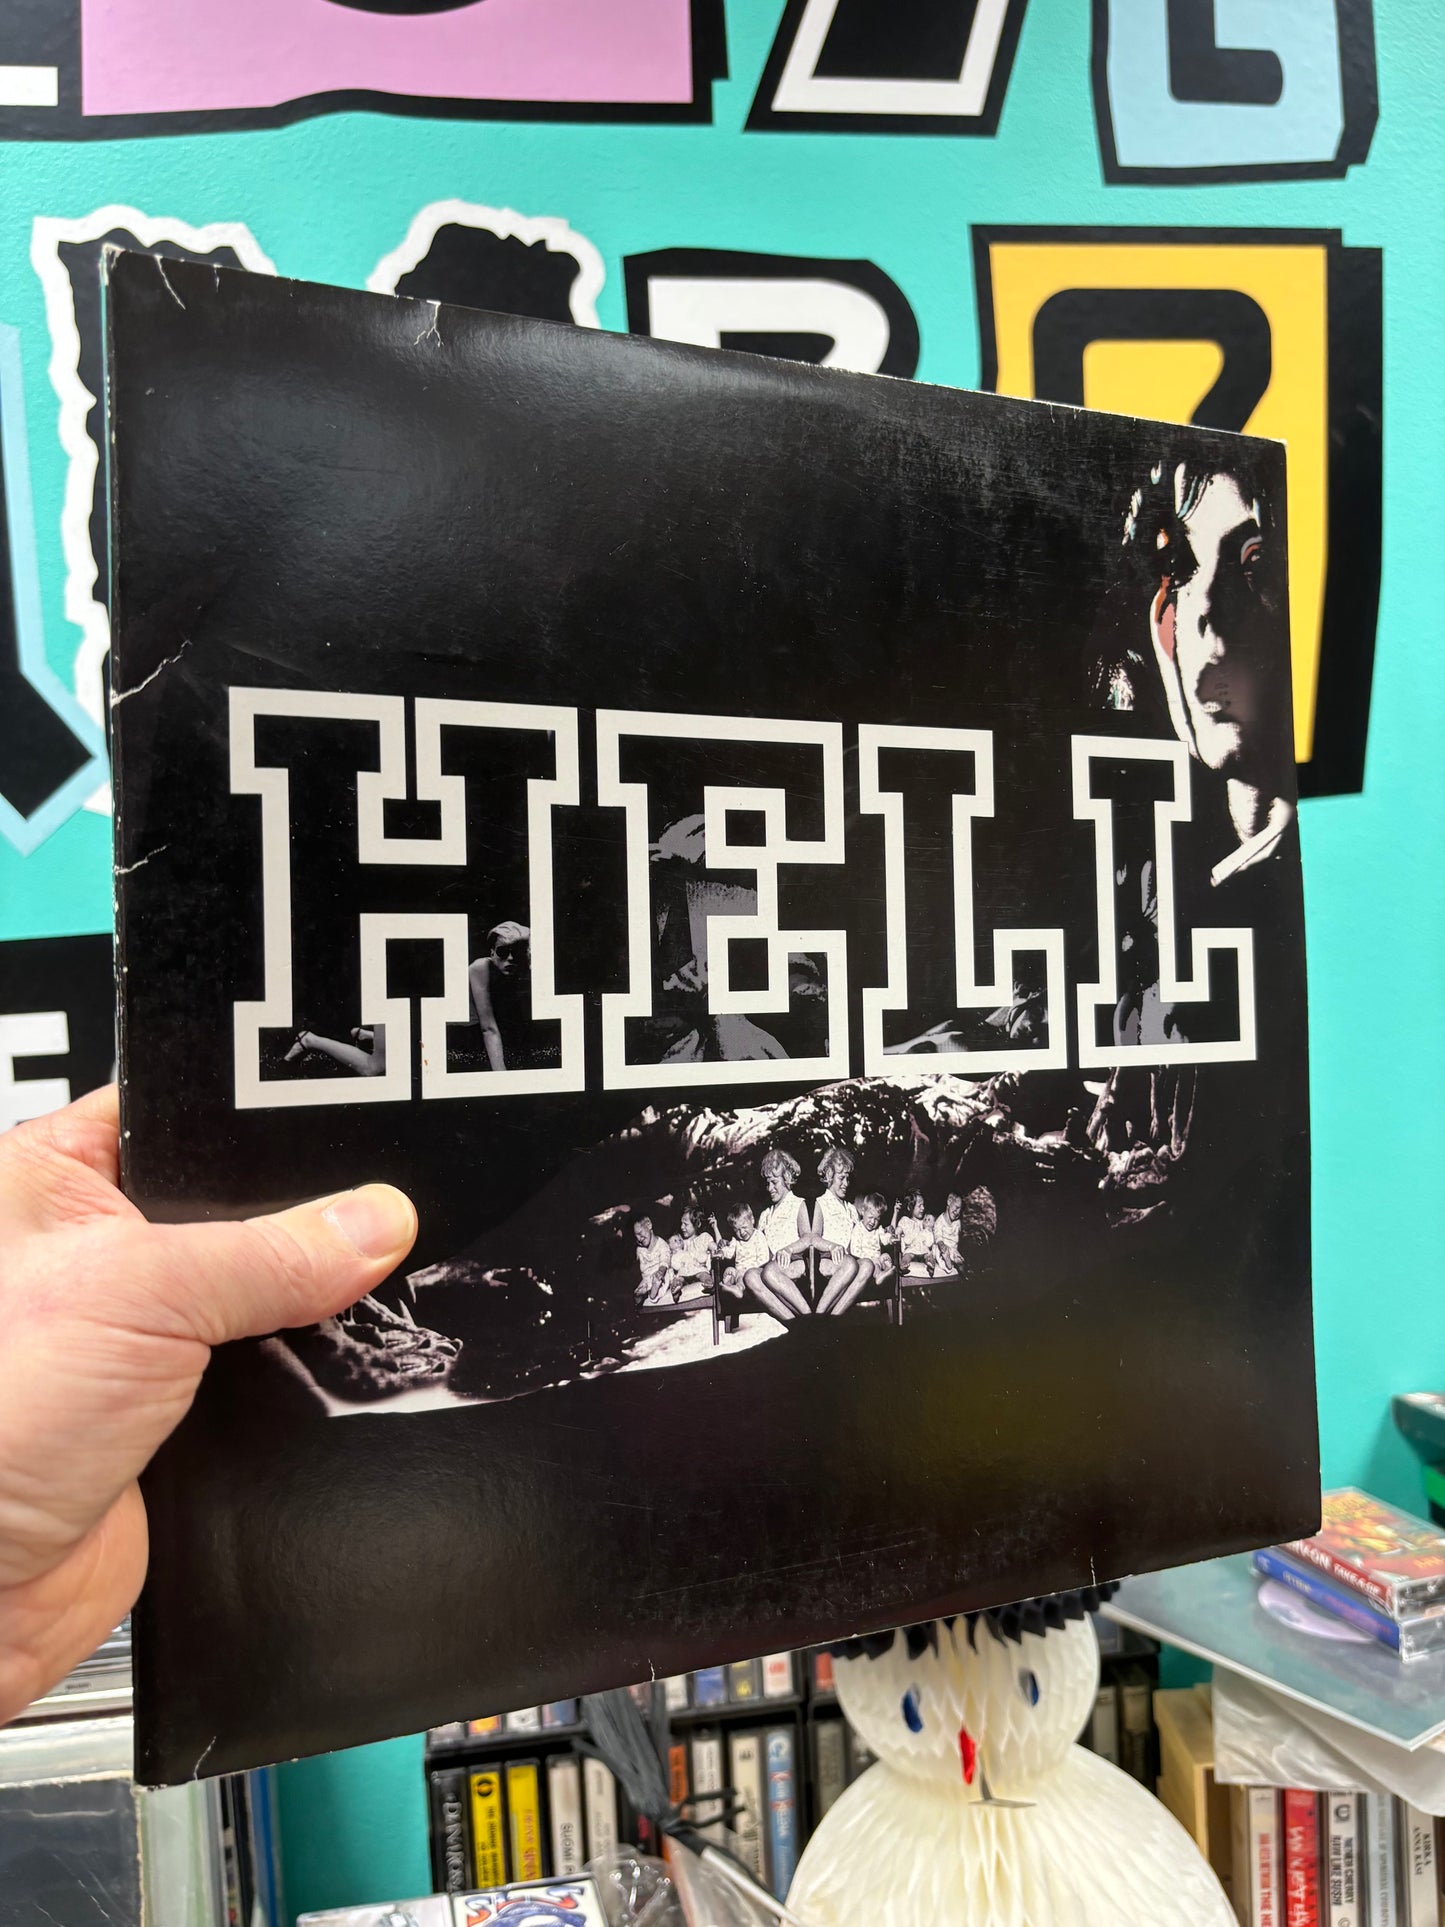 Hell: NY Muscle, 3x12inch album, gatefold,Only official vinyl pressing, Germany 2003